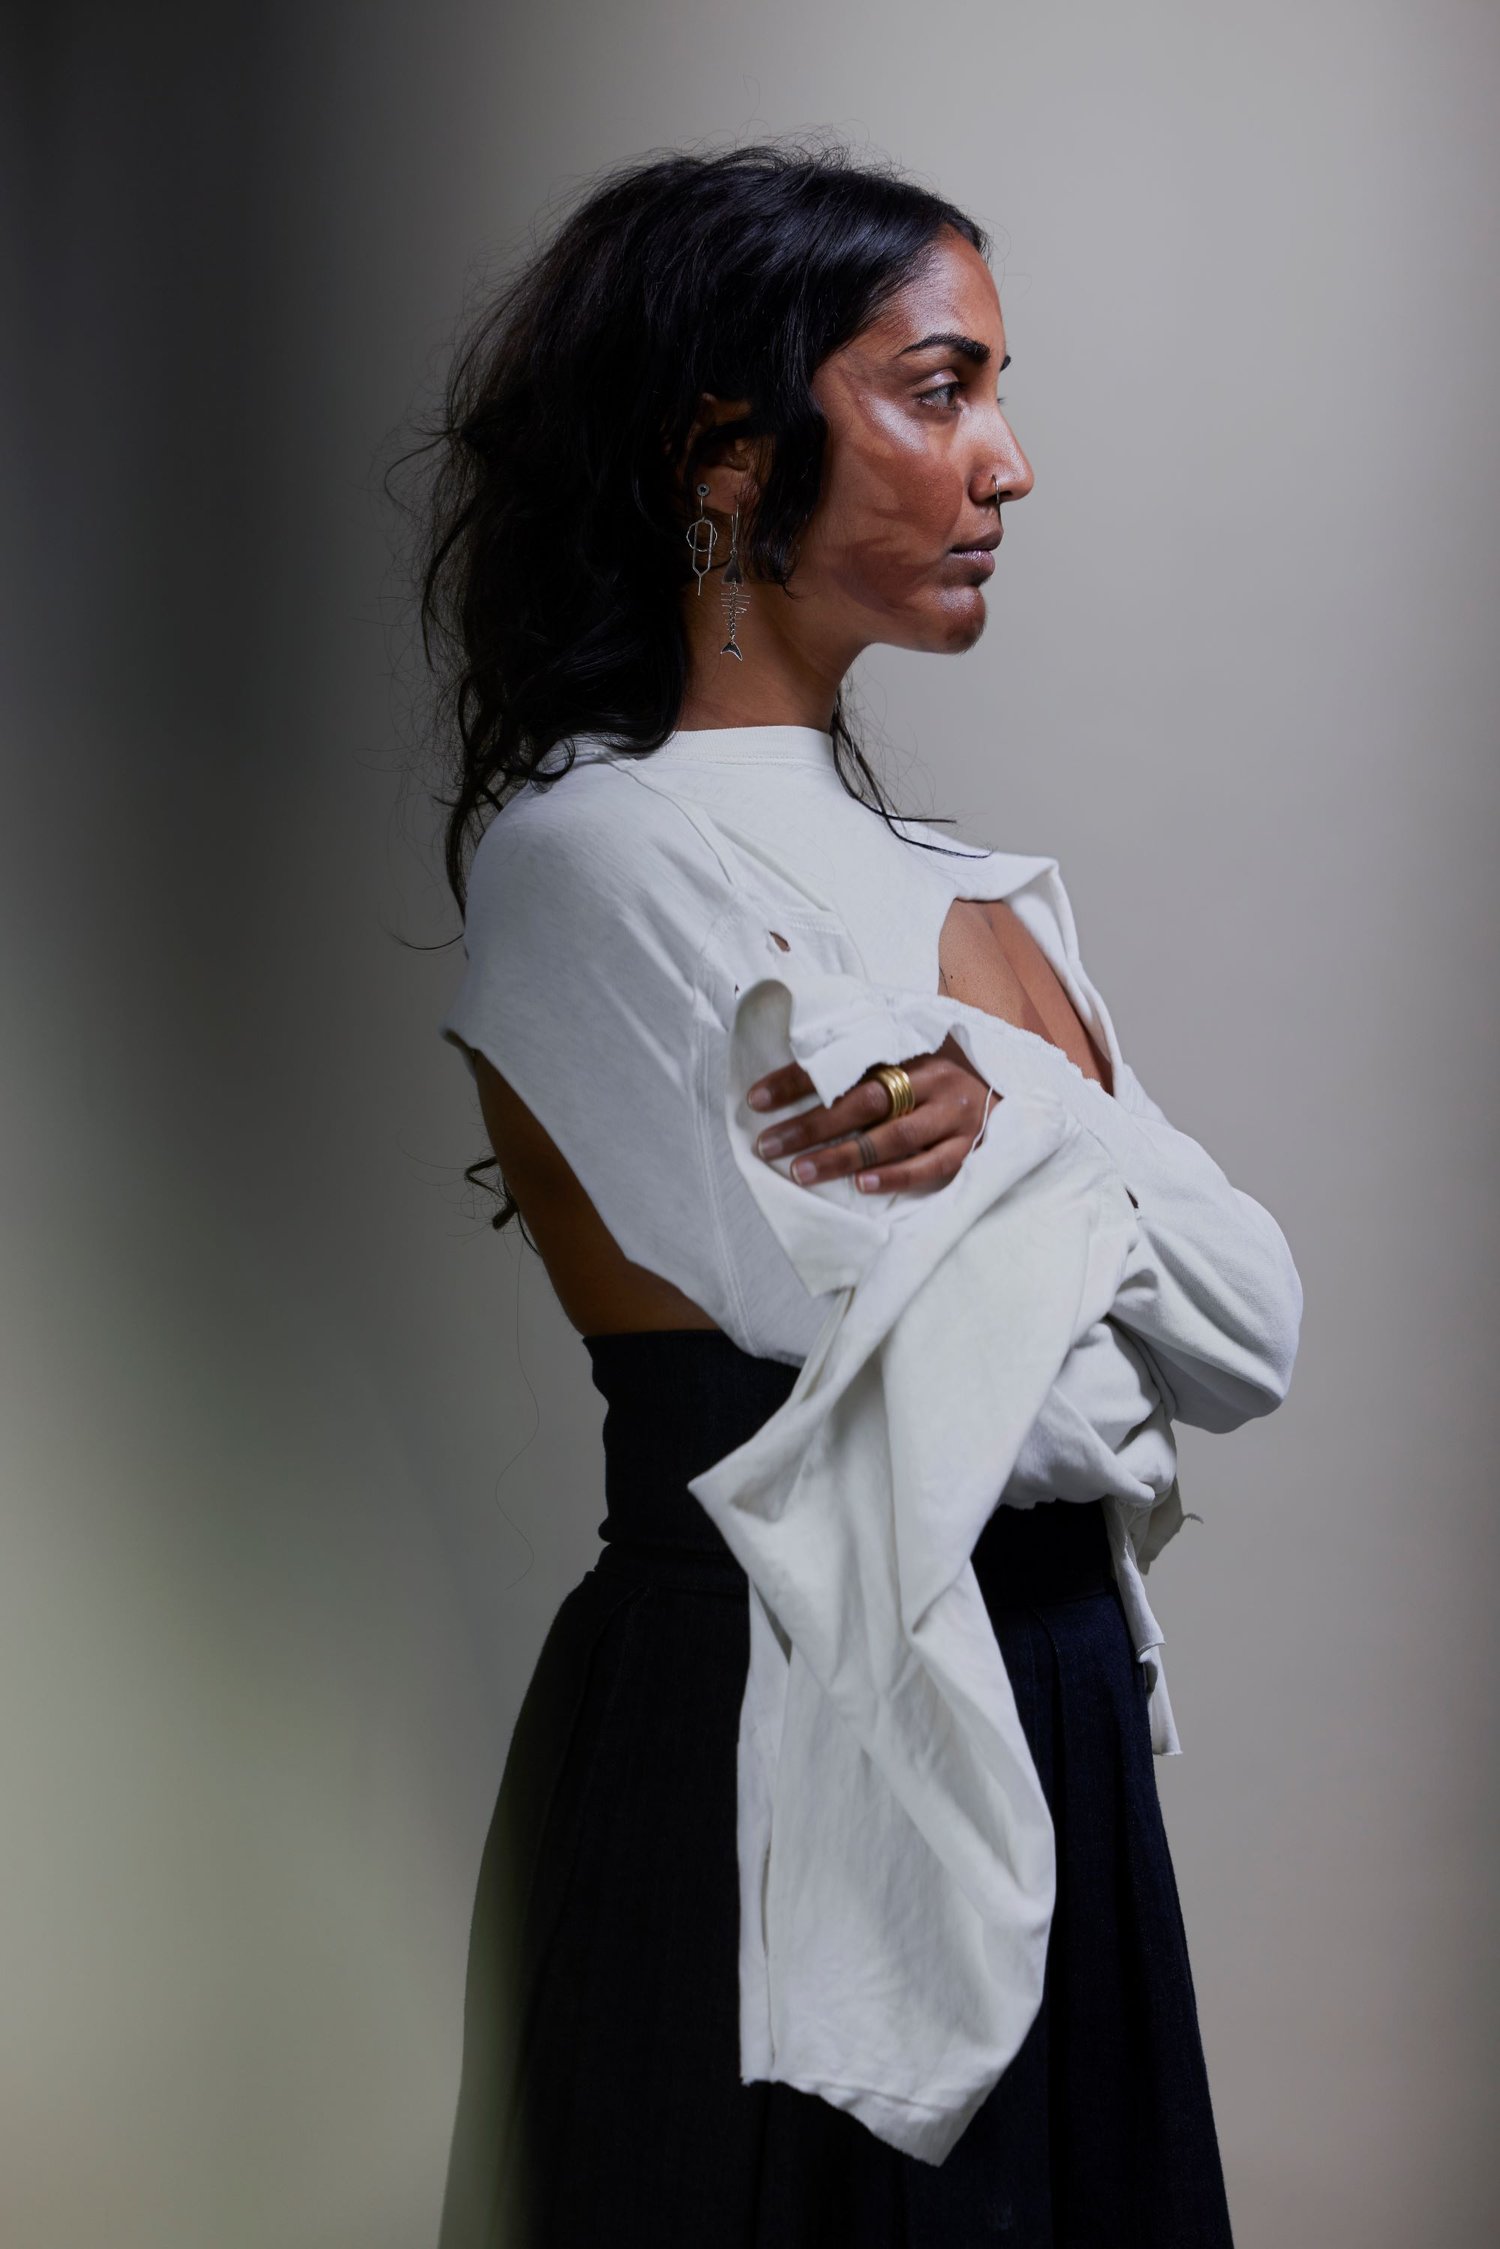 Person with shoulder-length hair wearing a billowing backless white blouse stands with their arms crossed in front of a shadowy wall. They are facing the side, revealing the henna on their face and dangling earrings.